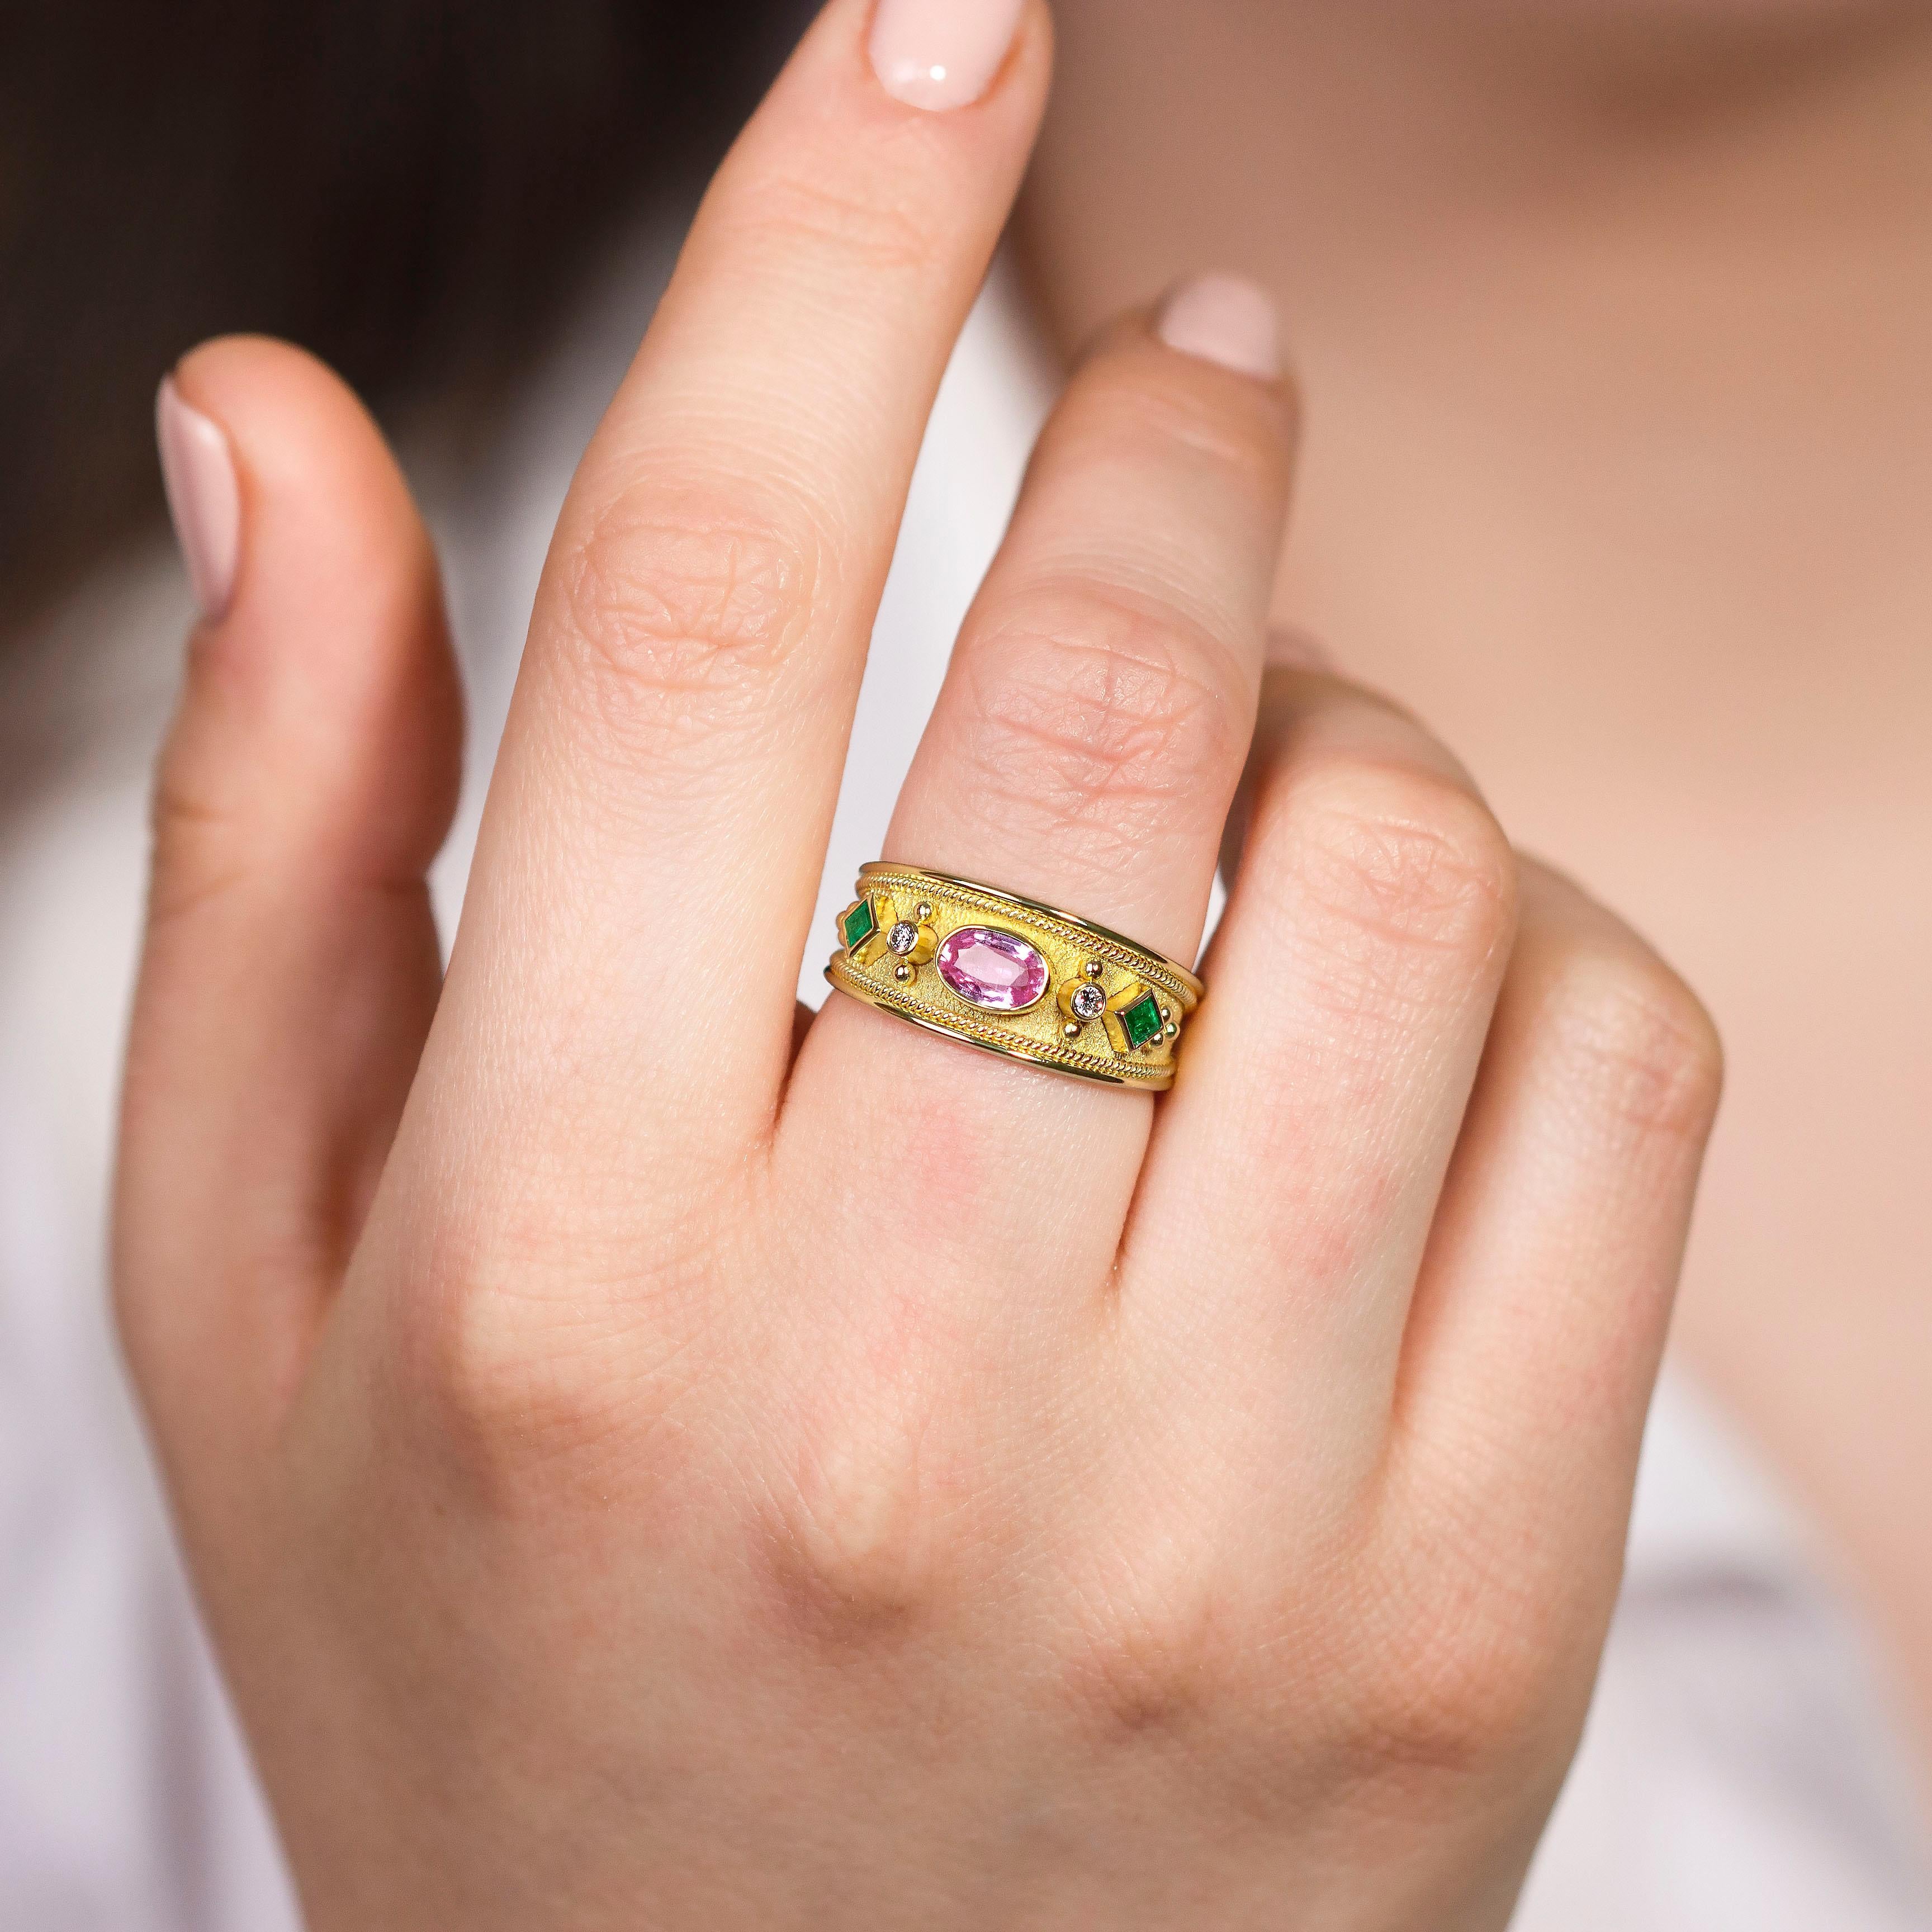 A gold ring adorned with two square emeralds on either side, beautifully complemented by a captivating oval sapphire—a harmonious symphony of color and timeless charm to wear on your hand.

100% handmade in our workshop.

Metal: 18K Gold
Gemstones: